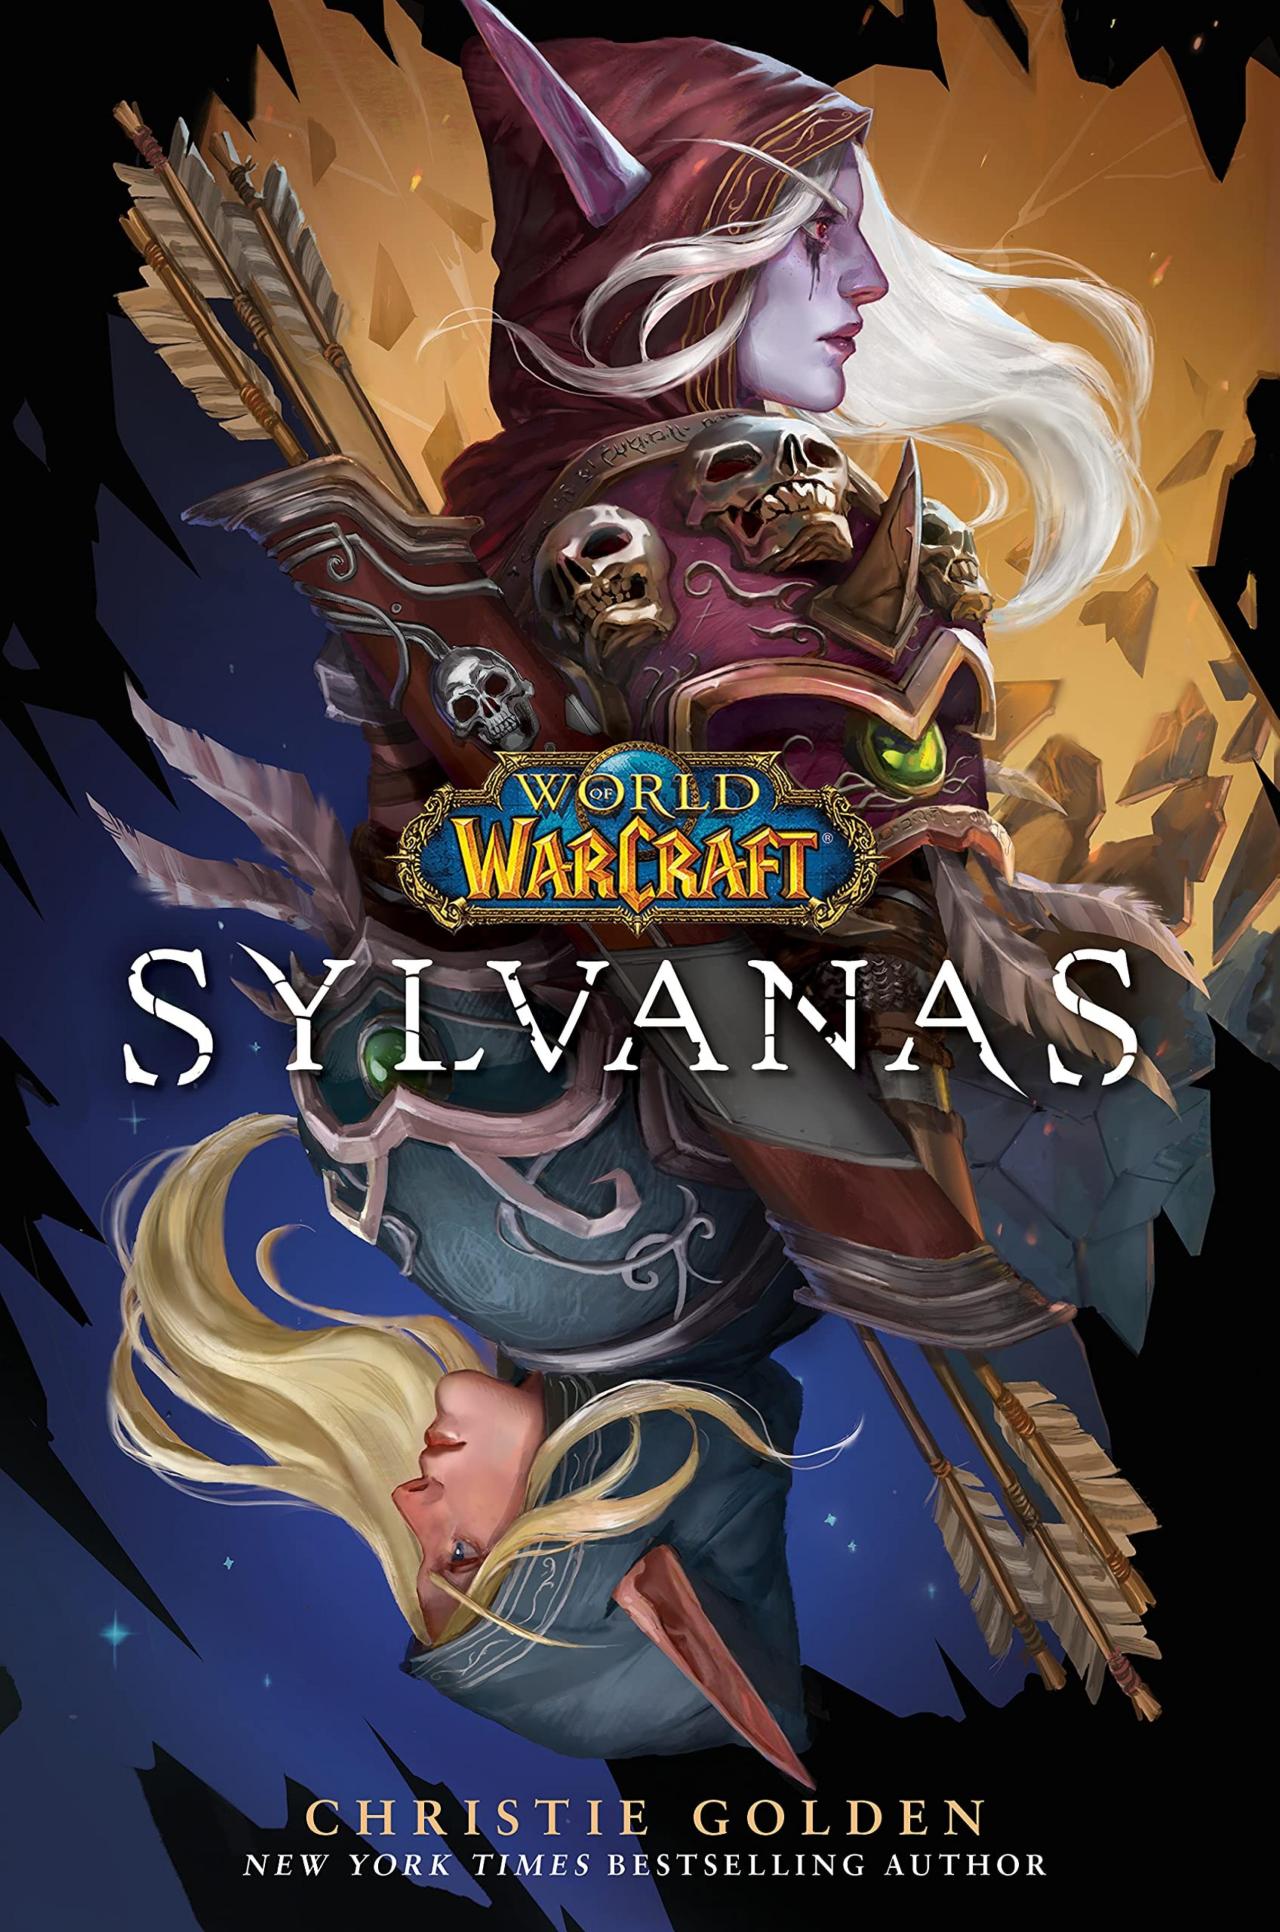 Book Cover for World of Warcraft: Sylvanas